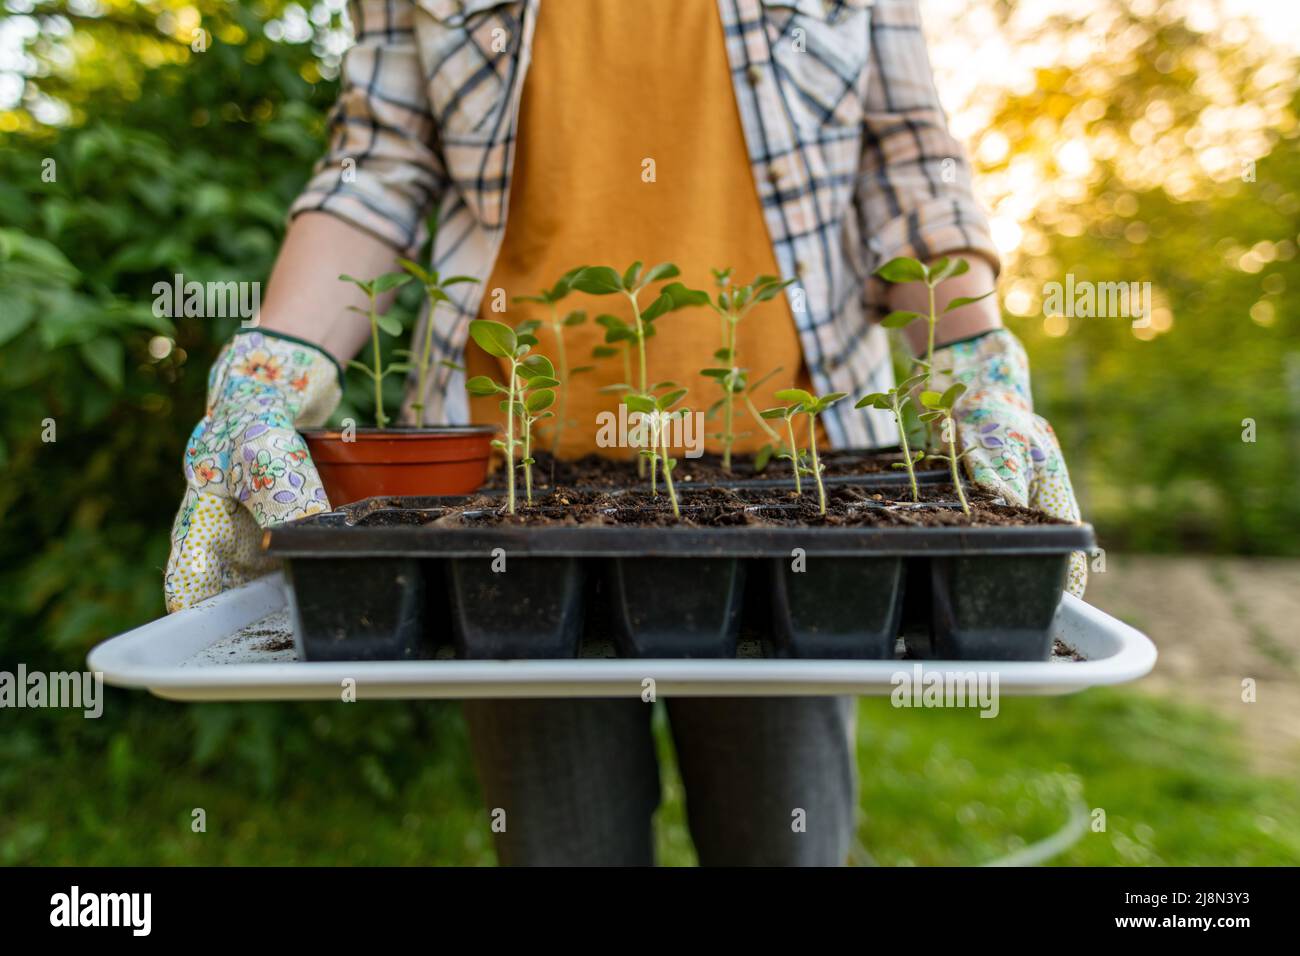 Unrecognizable woman standing in her garden, holding bunch of snapdragon seedlings in a propagator. Starting a cut flower garden. Gardening as a hobby Stock Photo